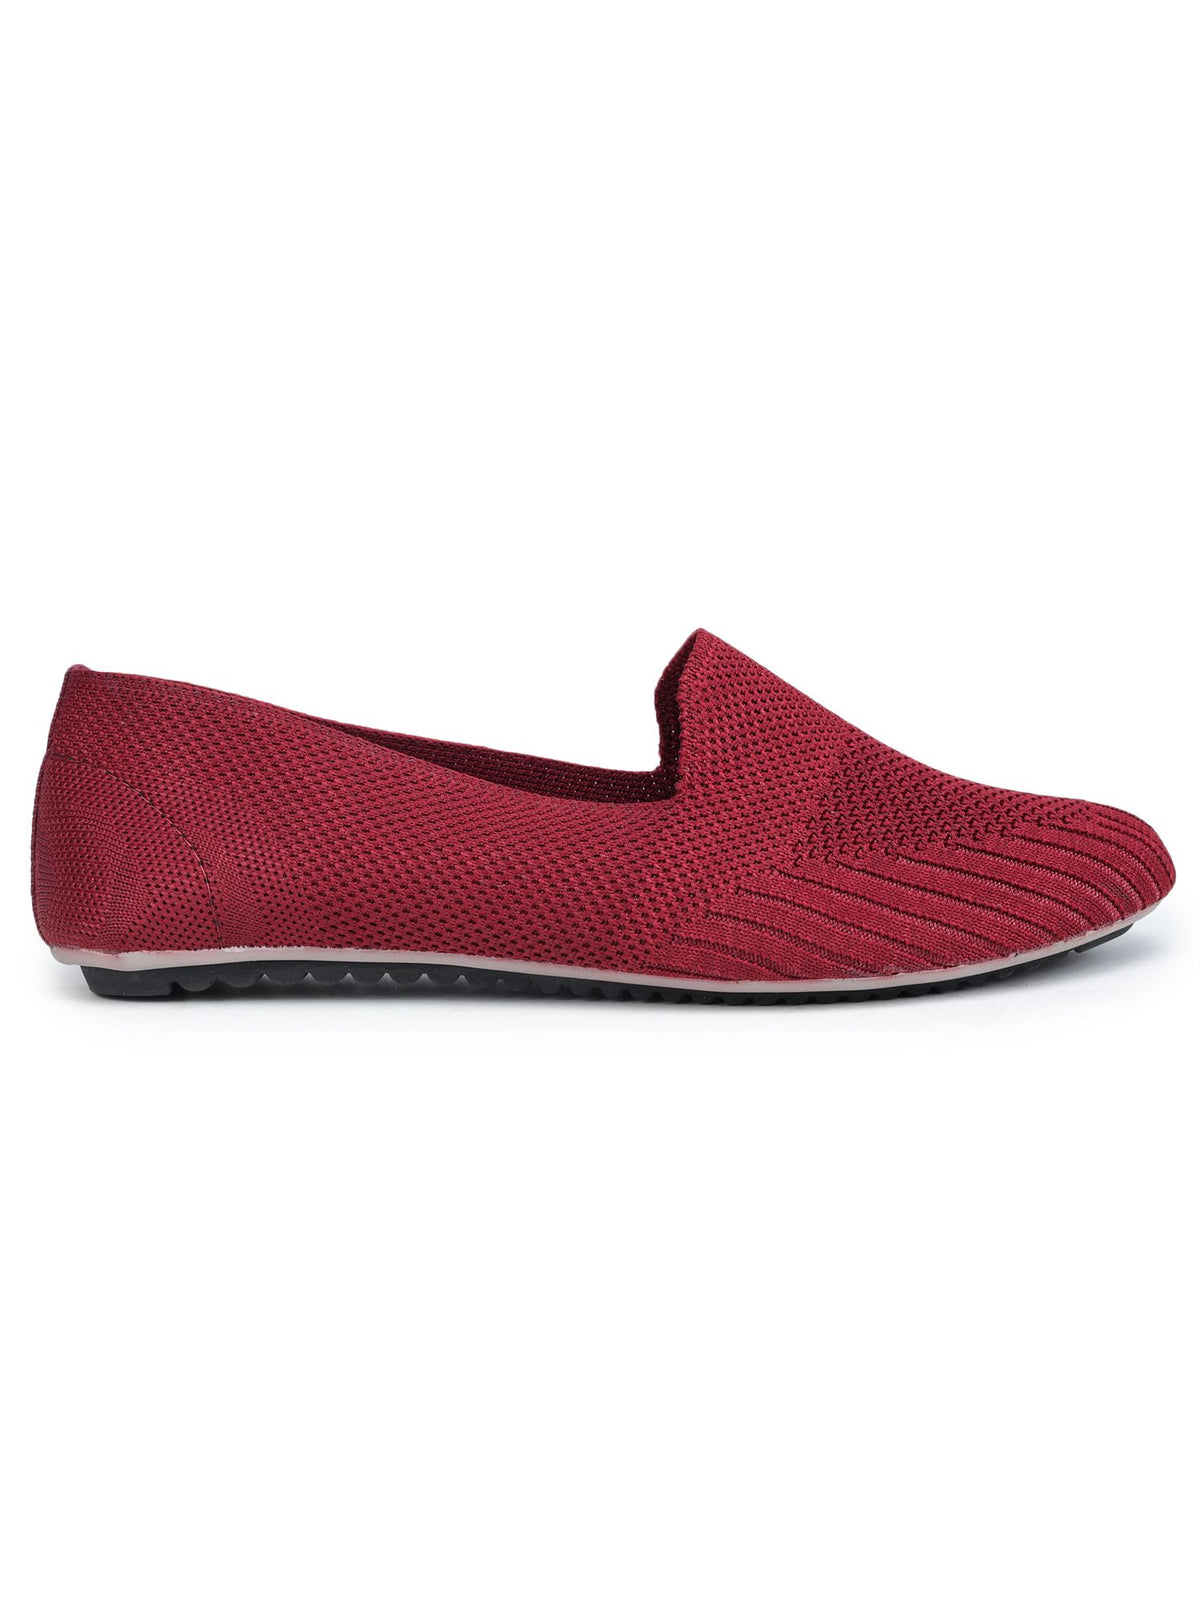 Maroon Solid Textile Slip On Casual Bellies for Women